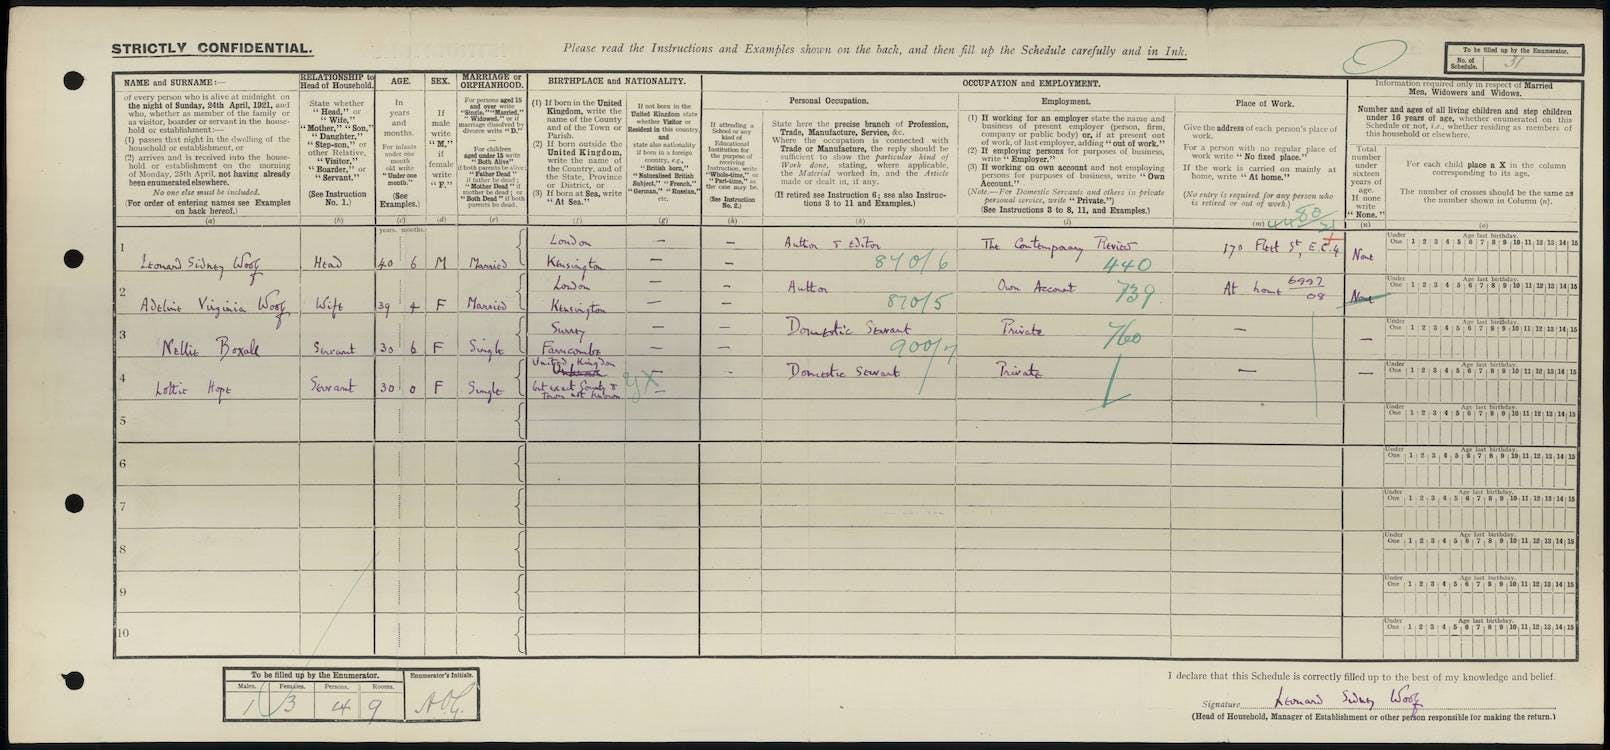 Virginia and Sidney Woolf in the 1921 Census.